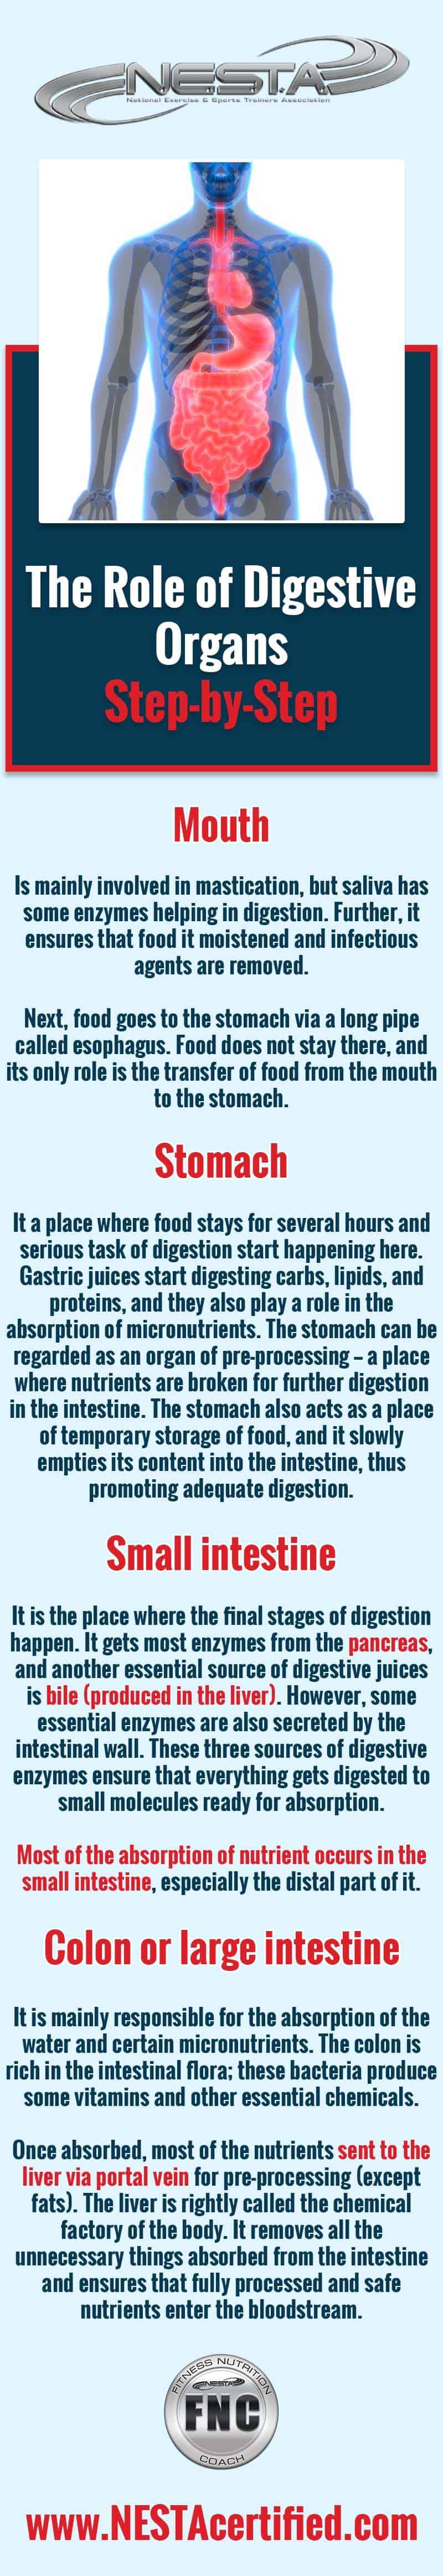 The Stages of Digestion & How Enzymes Help